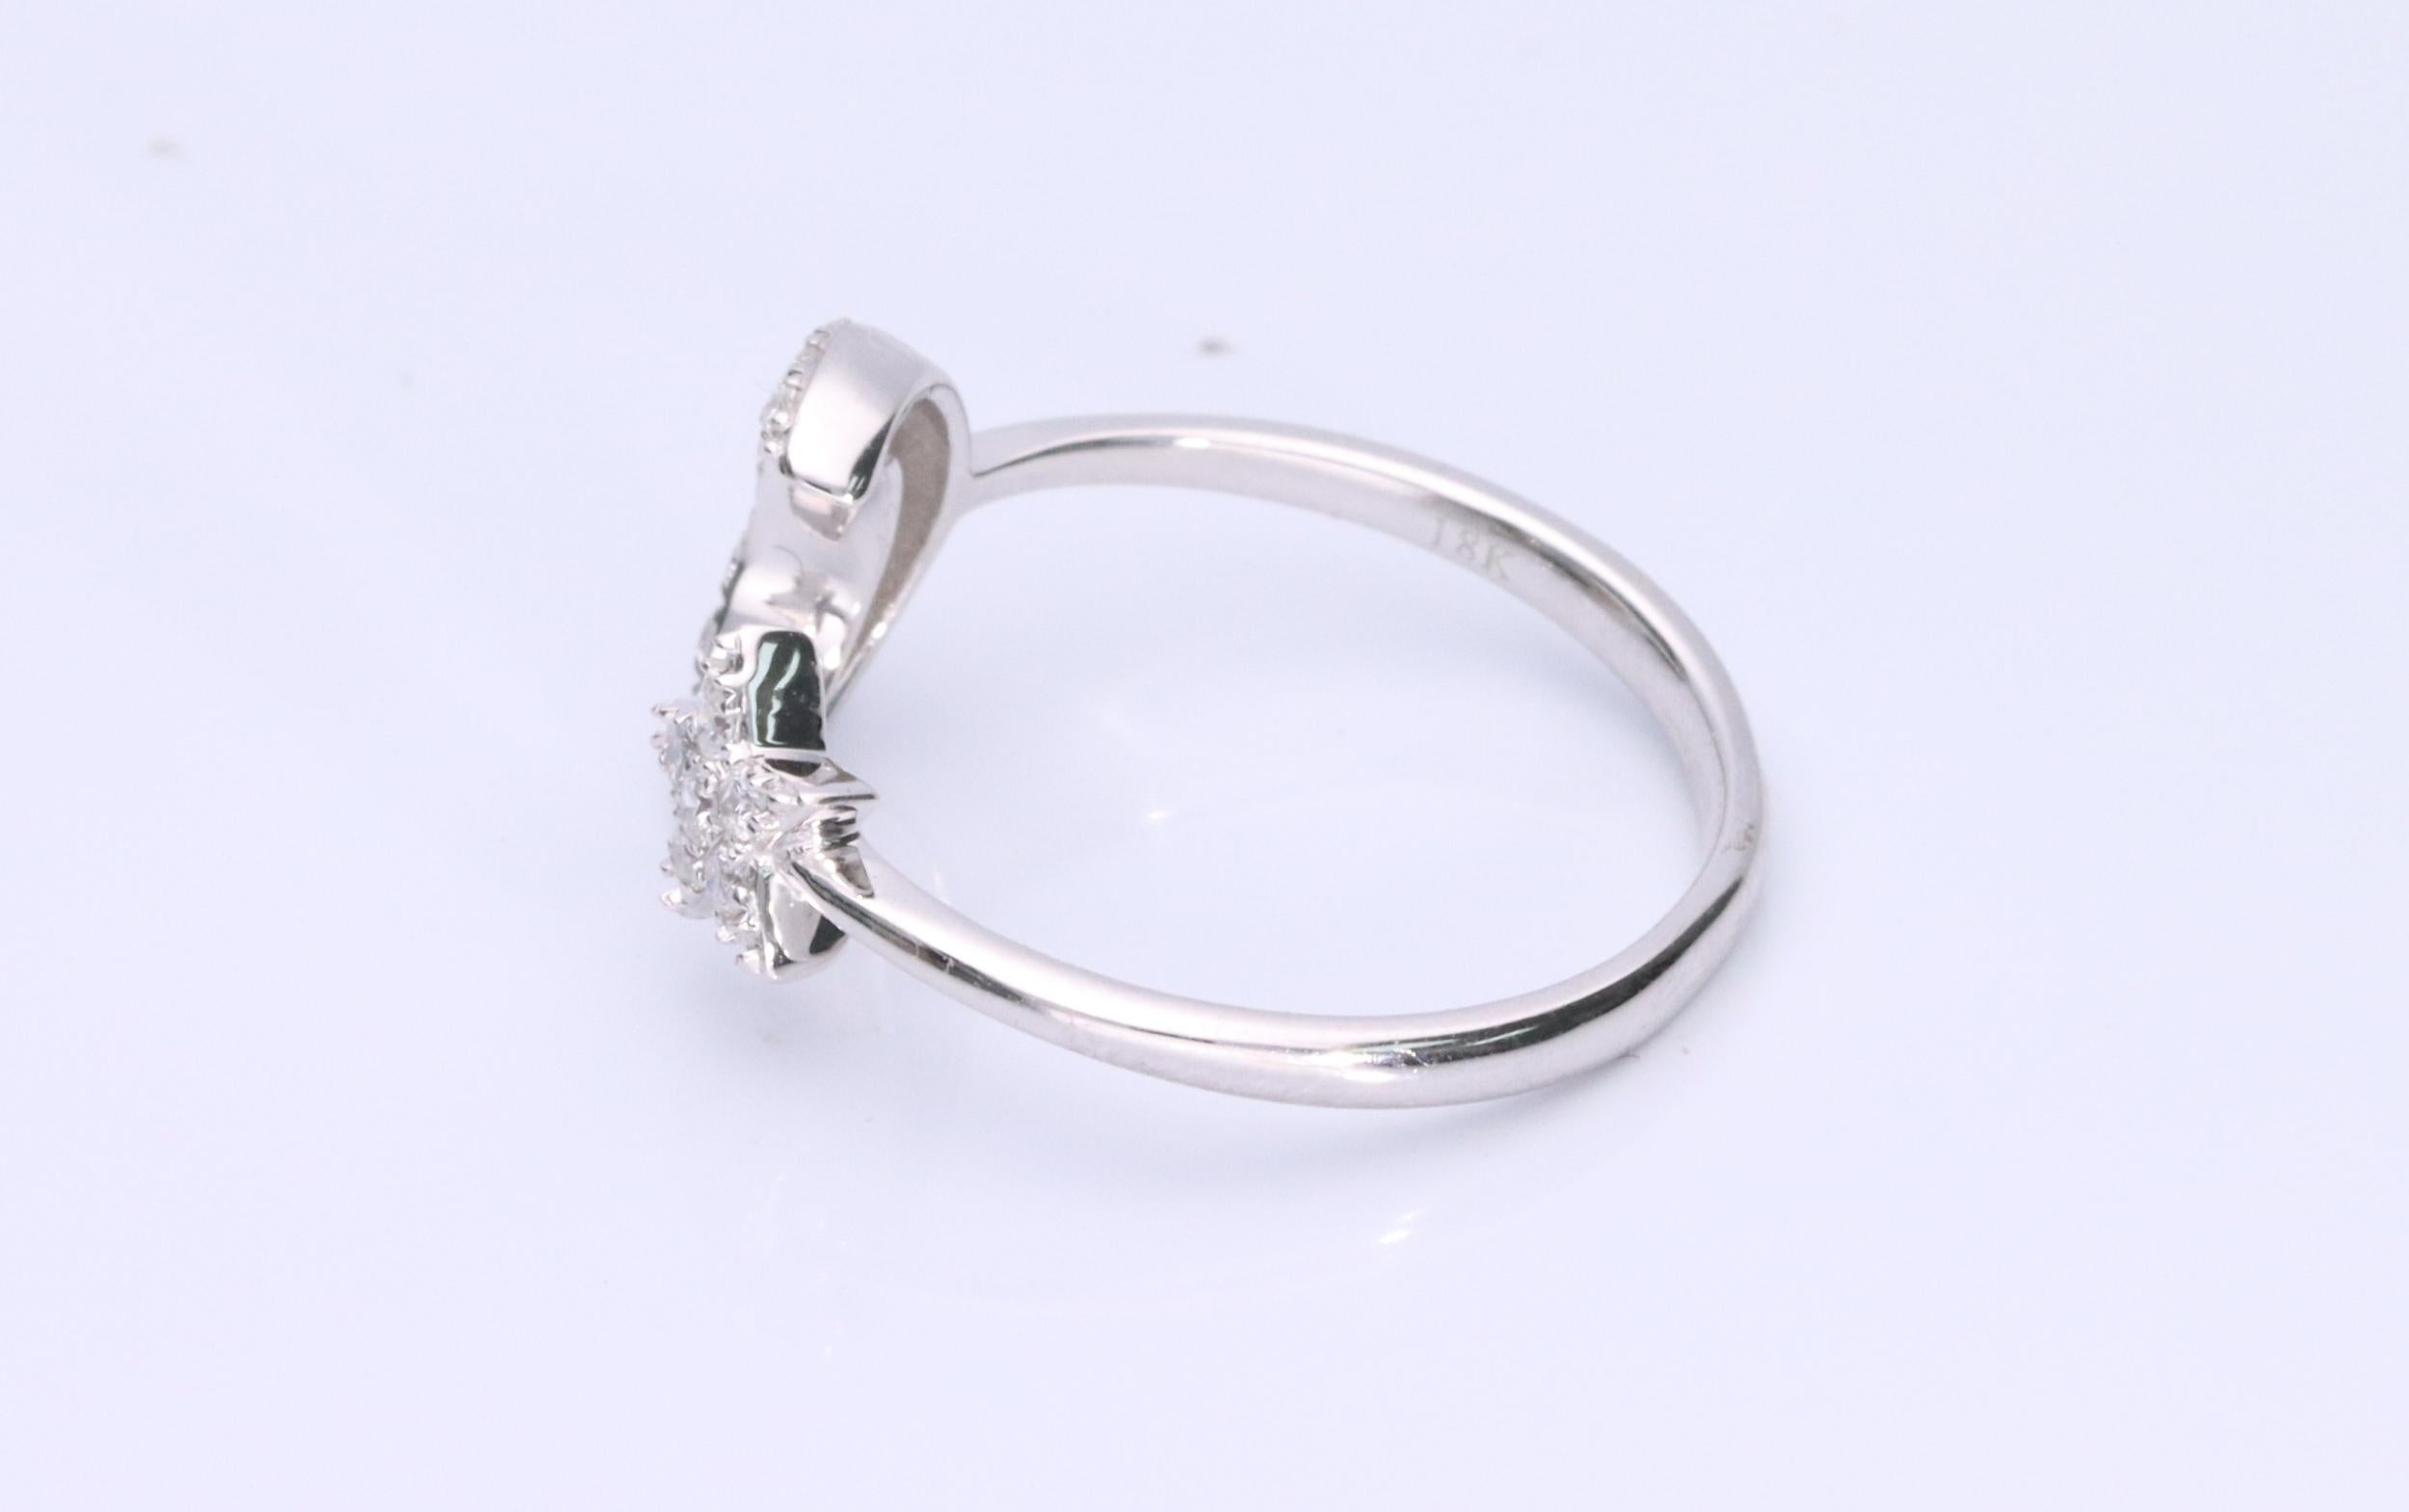 Decorate yourself in elegance with this Ring is crafted from 18-karat White Gold by Gin & Grace. This Ring is made up of  Round-cut White Diamond (21 Pcs) 0.27 carat. This Ring is weight 2.52 grams. This delicate ring is polished to a high finish